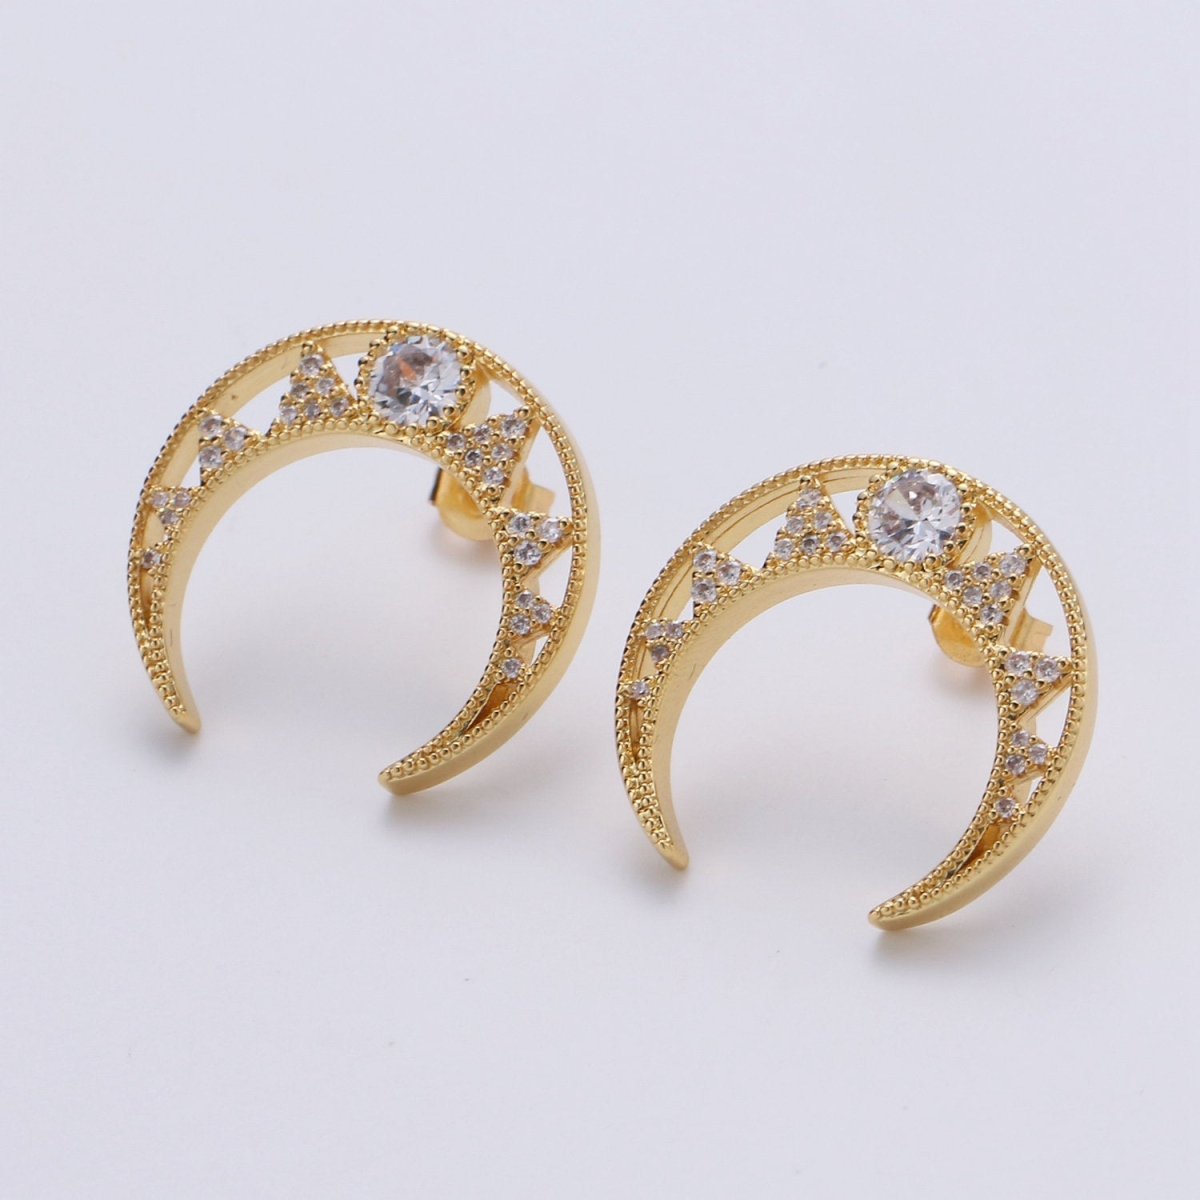 CZ Paved Crescent Moon Cartilage Earring, moon stud, dainty tragus earring, conch piercing, gold moon stud earring Celestial Jewelry Q-177 - DLUXCA